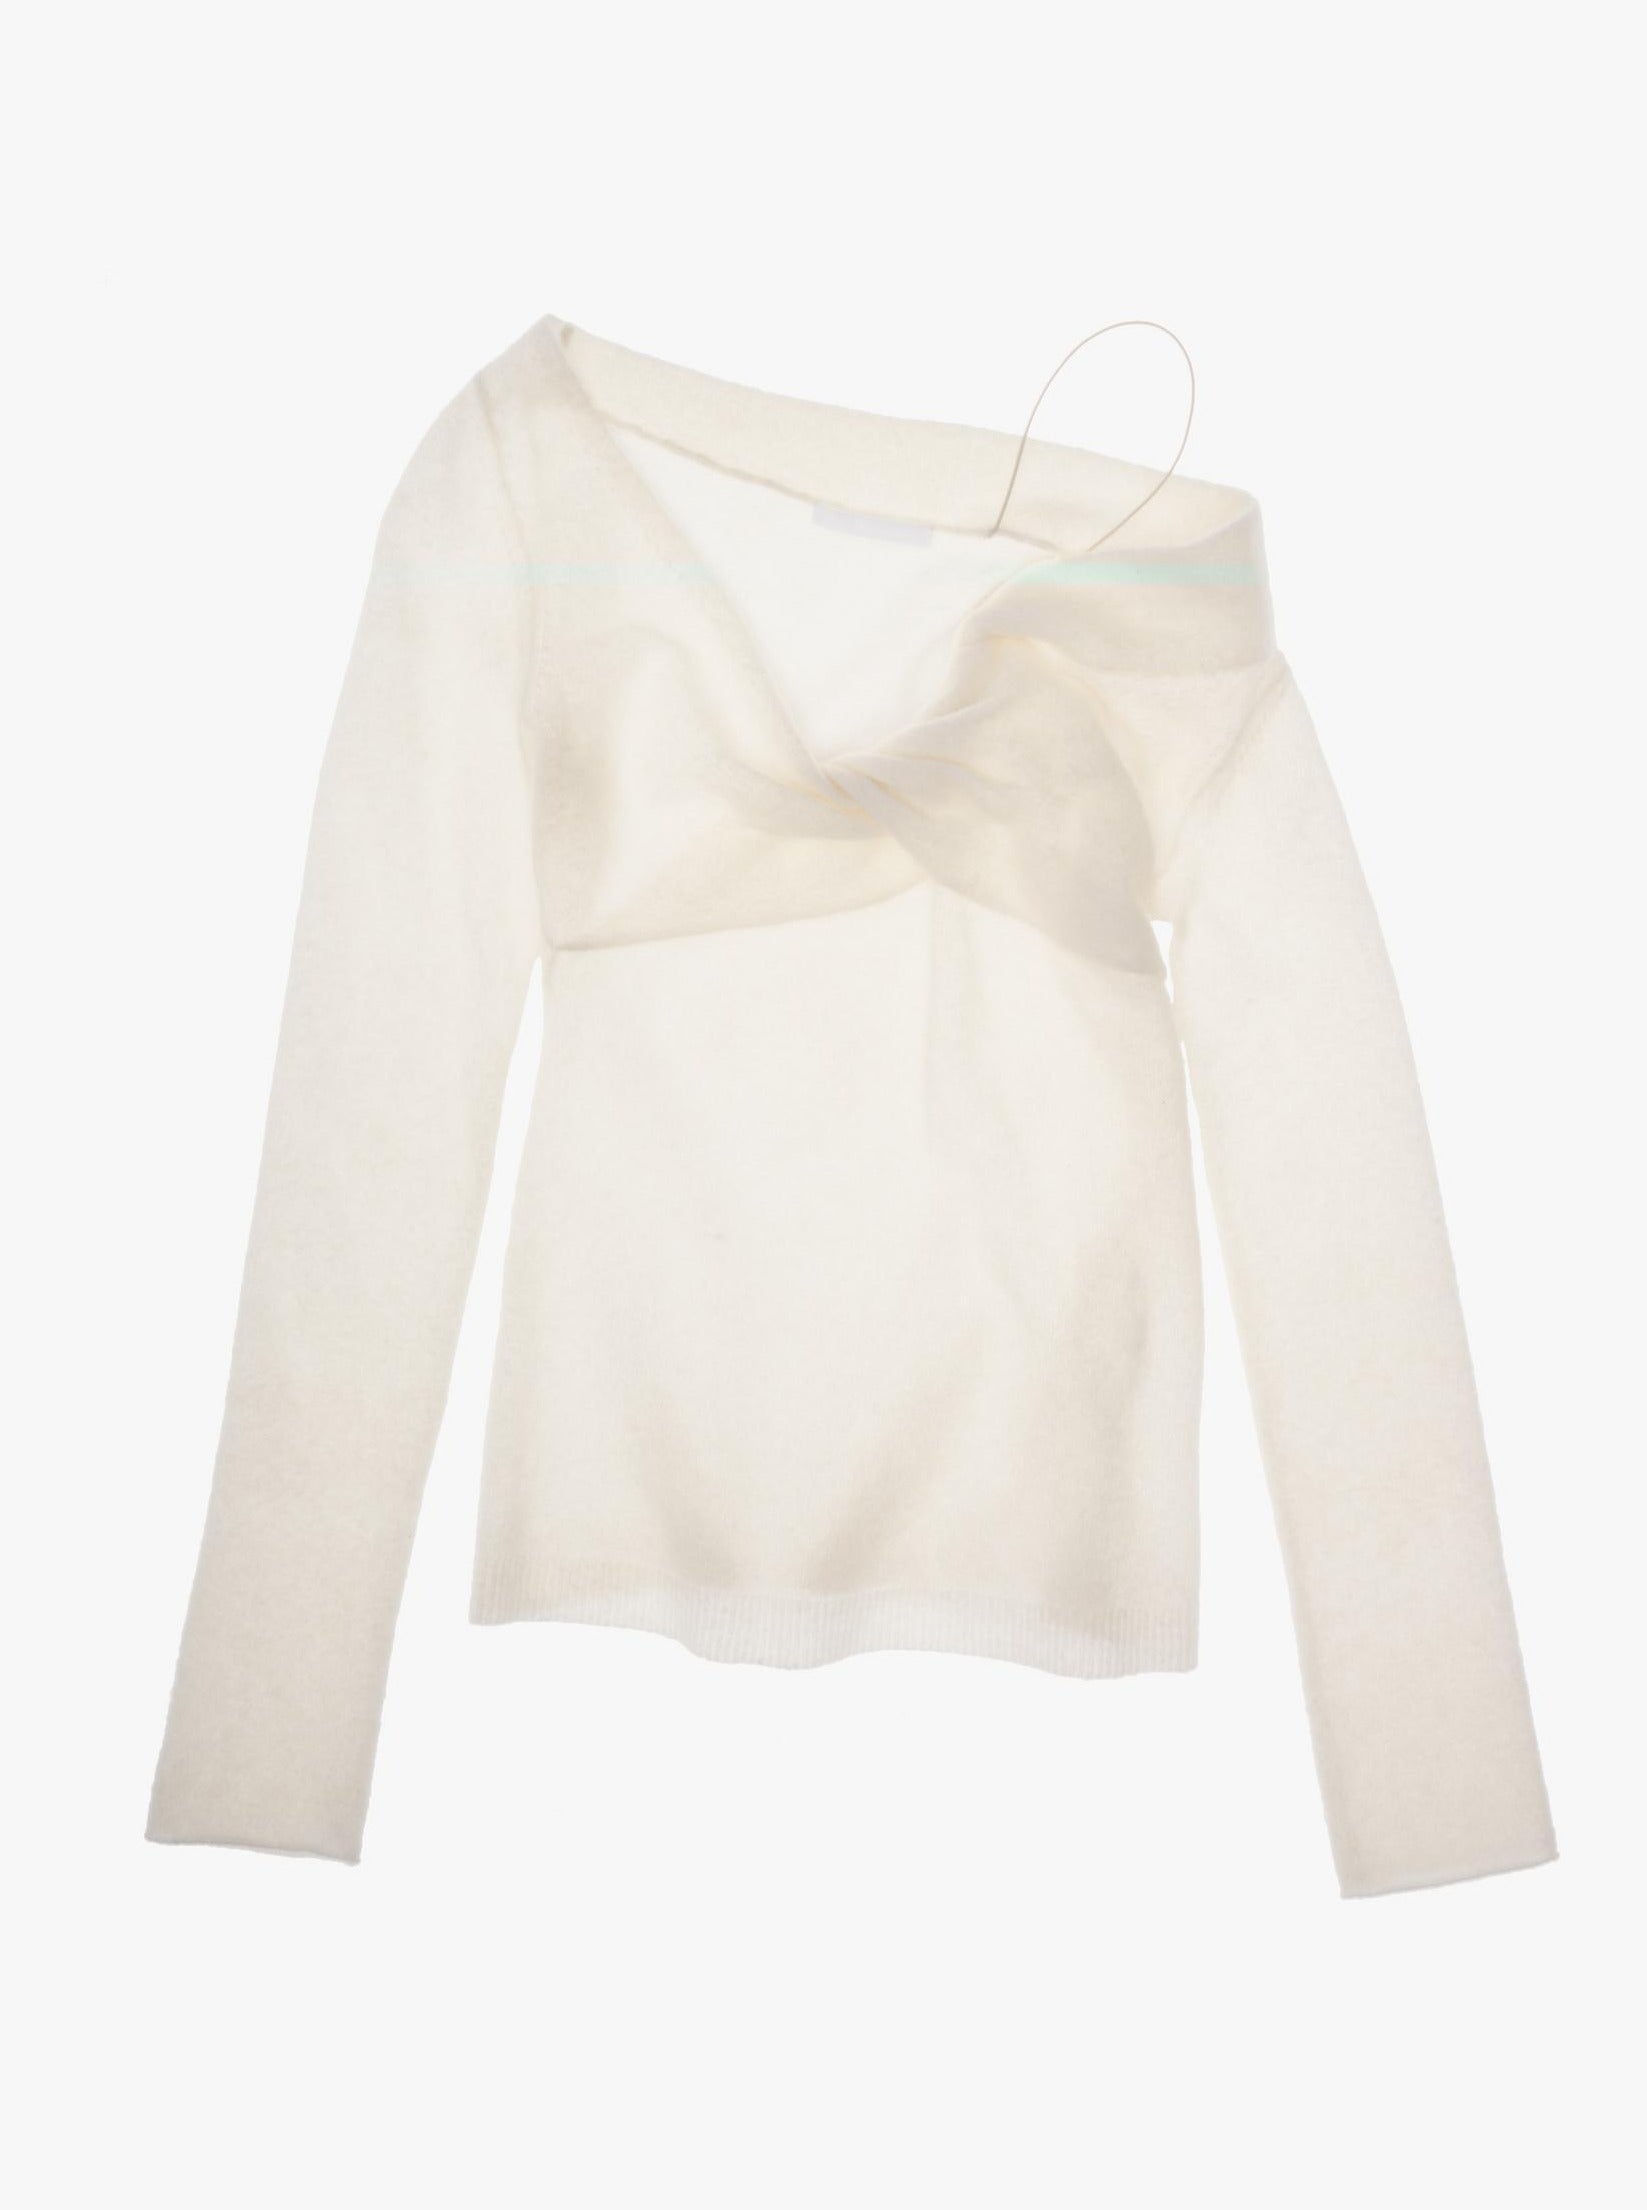 IVORY OFF THE SHOULDER SWEATER